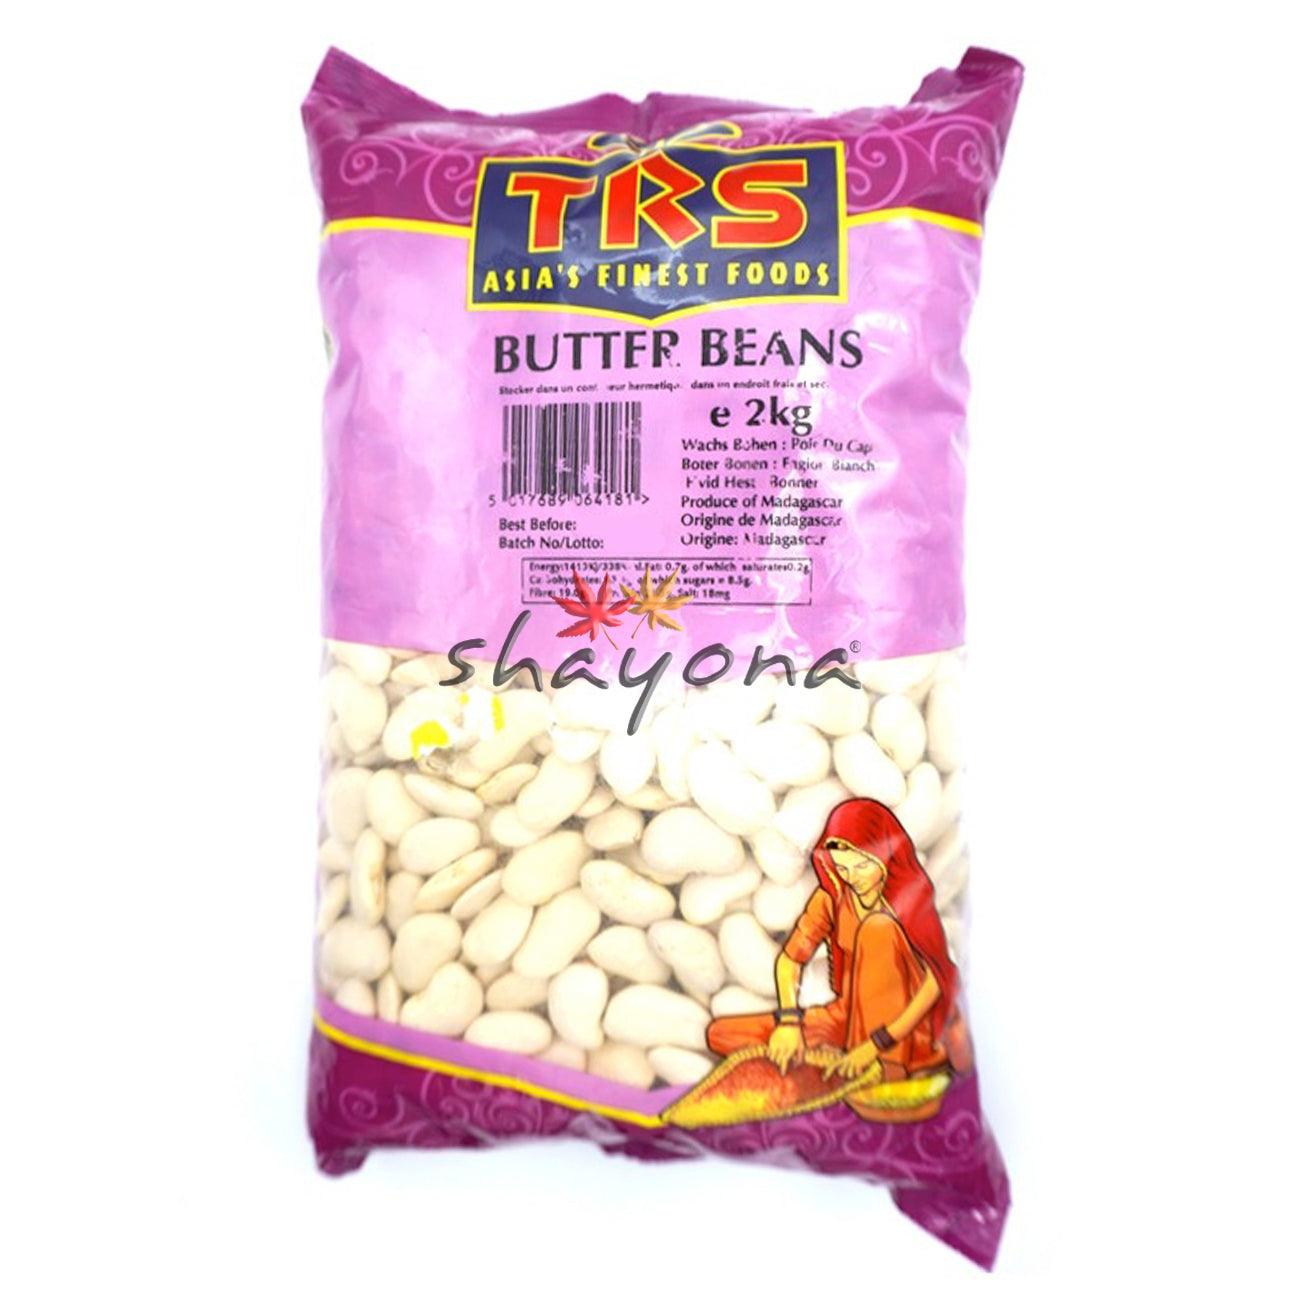 TRS Butter Beans - Shayona UK